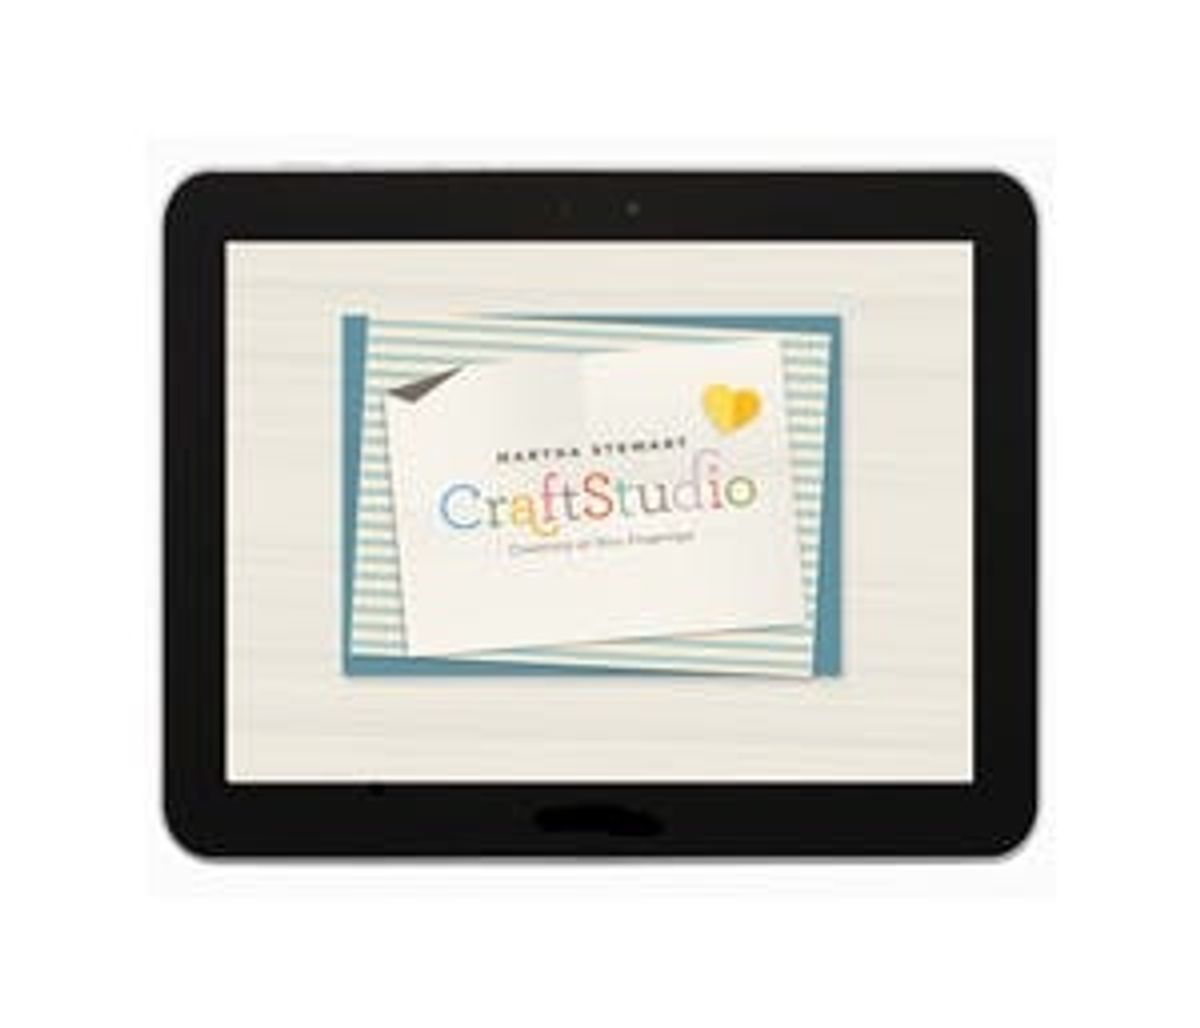 Our Review of Martha Stewart’s CraftStudio iPad App